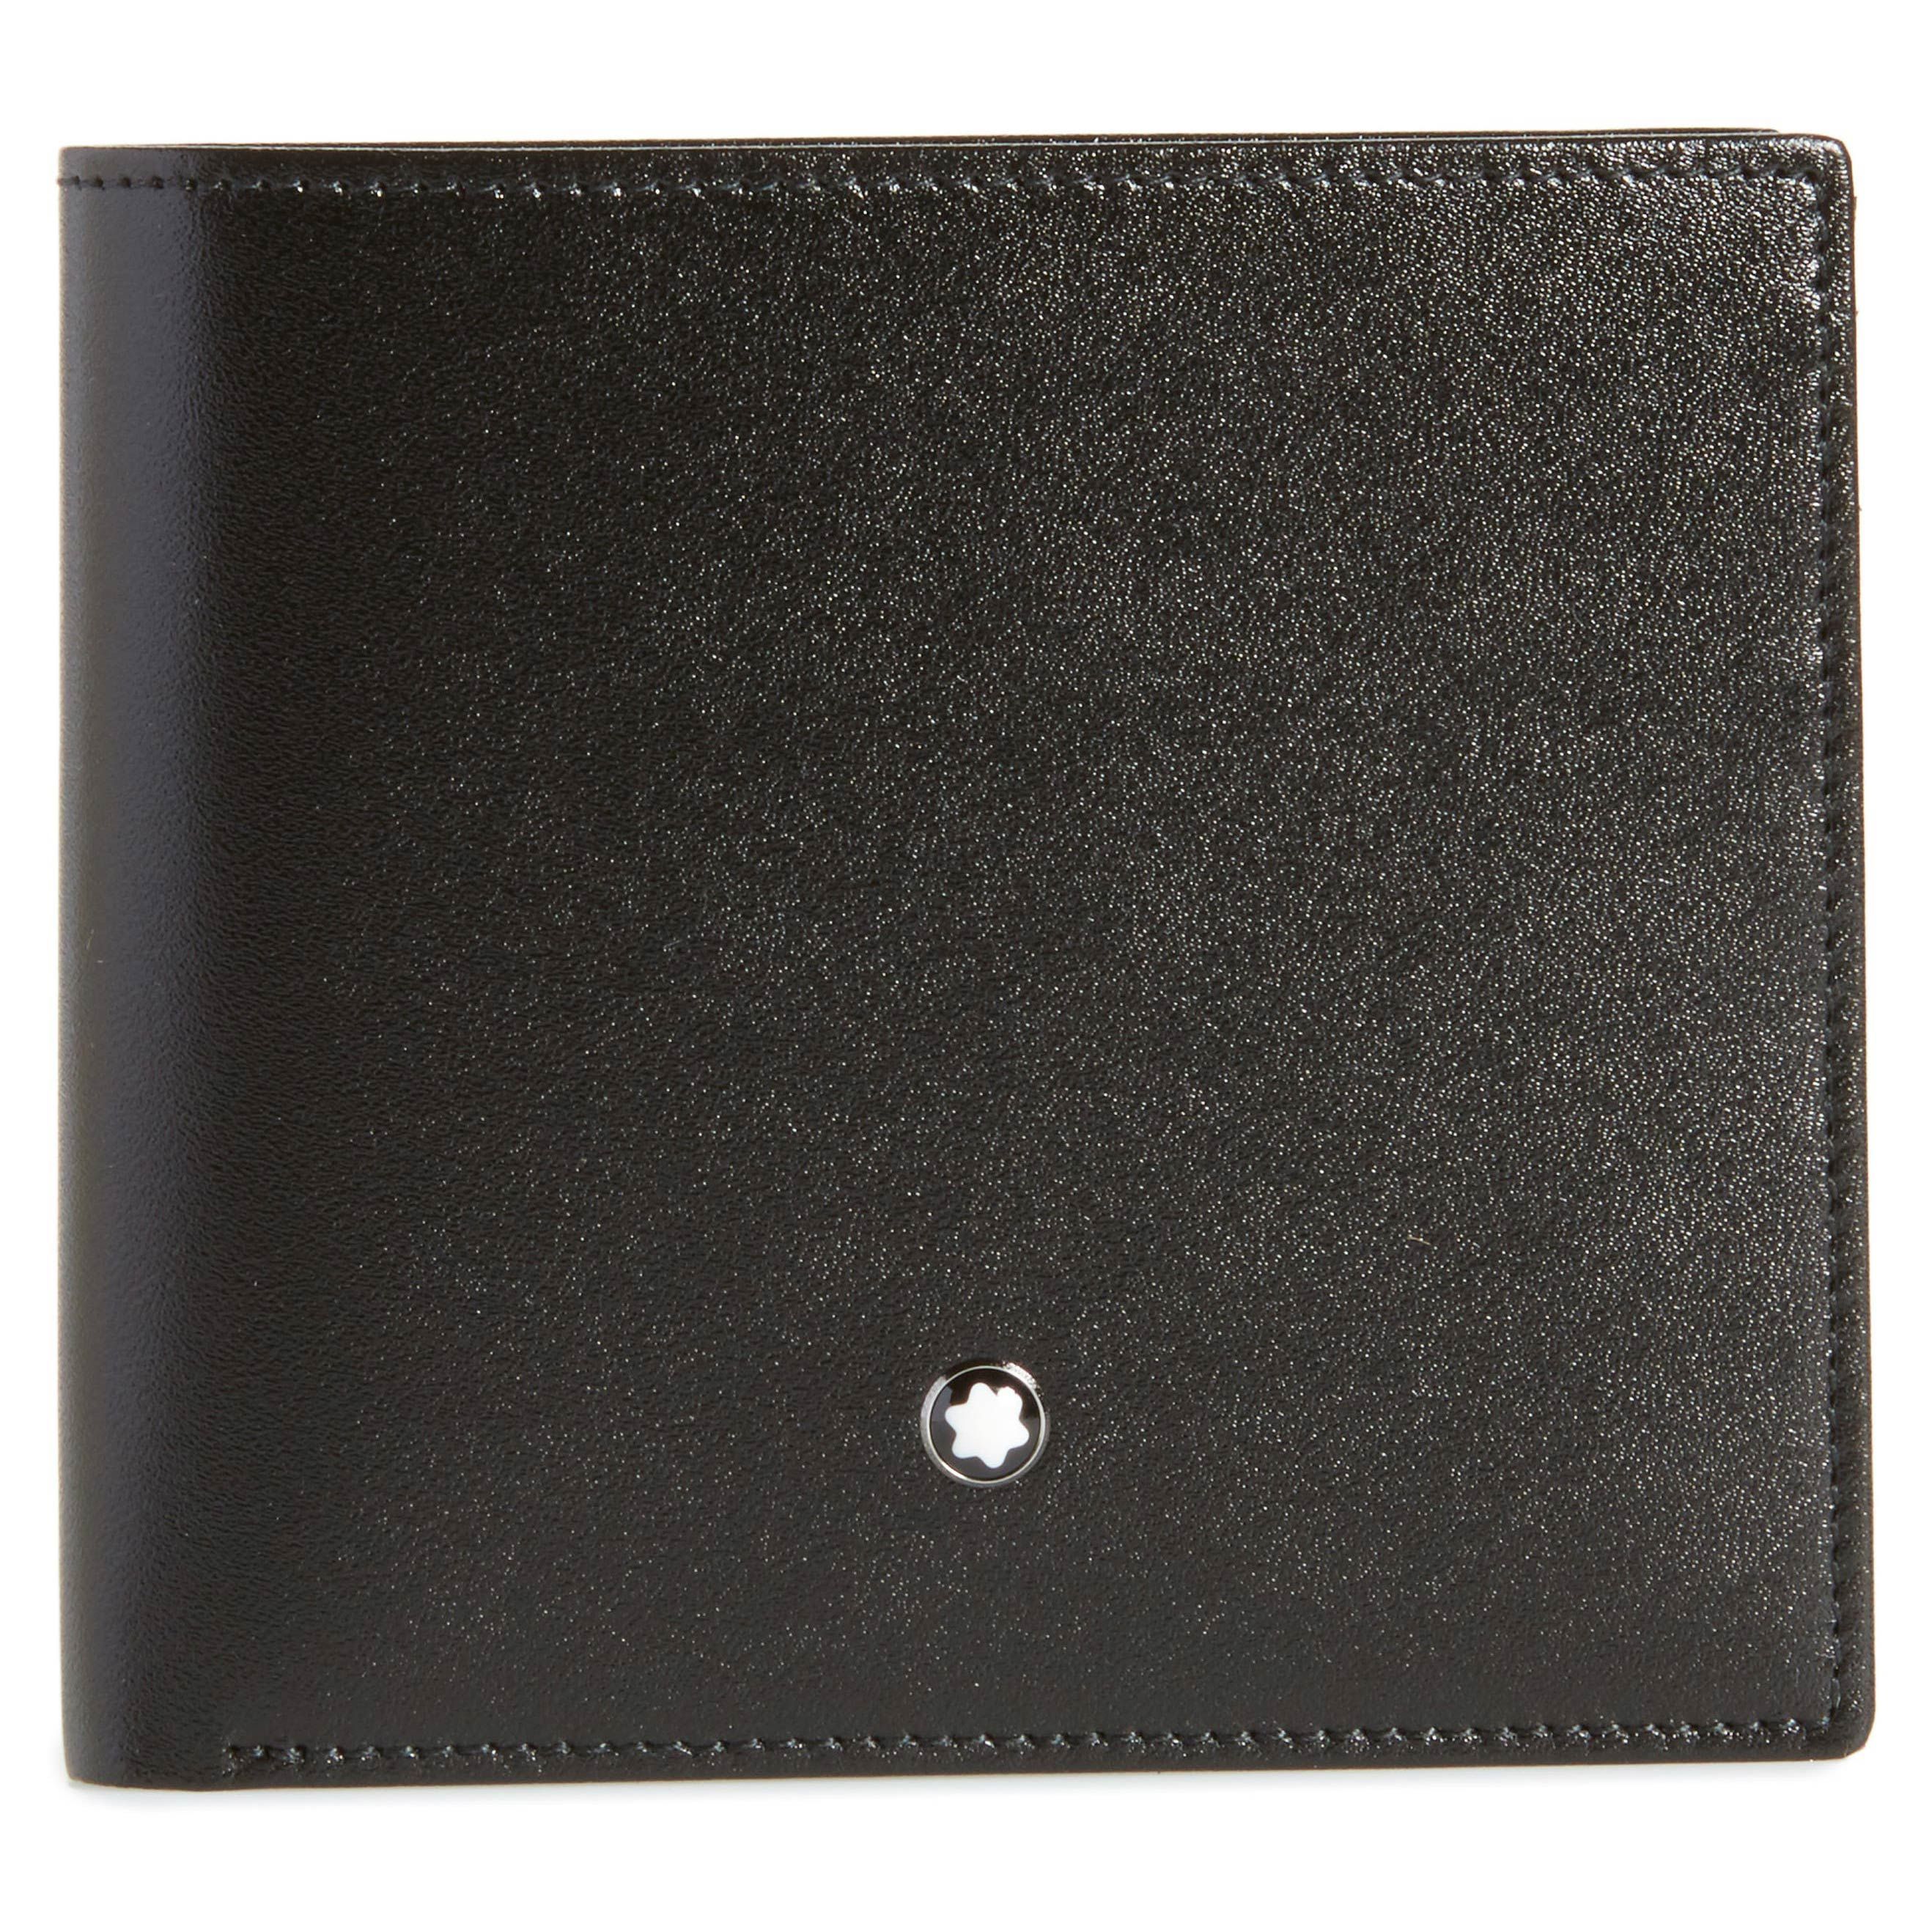 What are some top brands for mens and womens wallets? - Quora